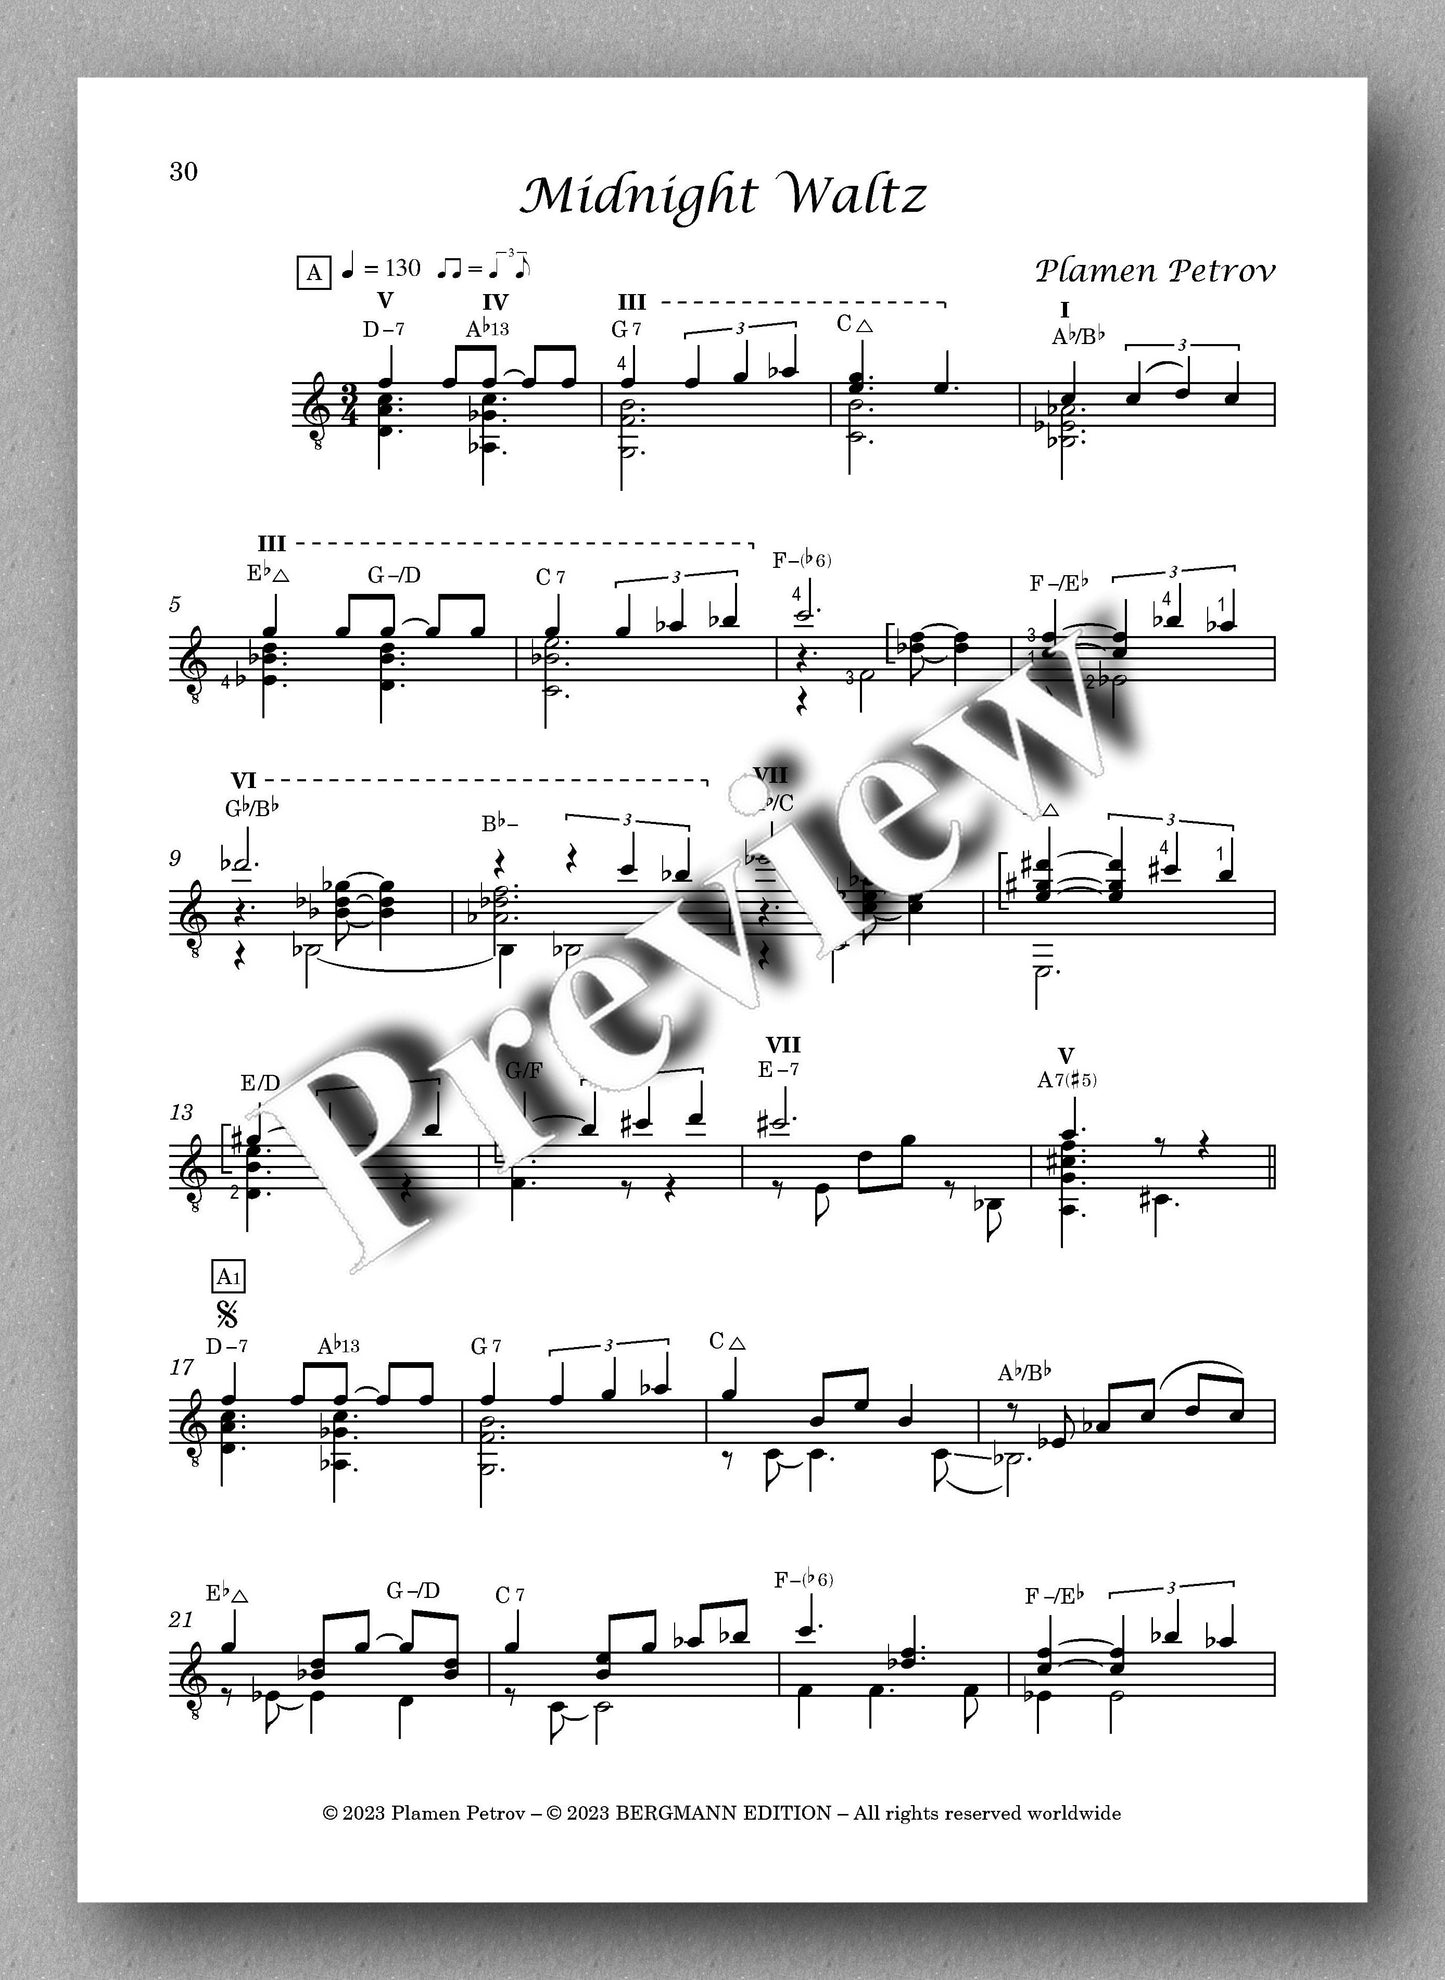 "When You’re Waiting for Me", by Plamen Petrov - preview of the Music score 7